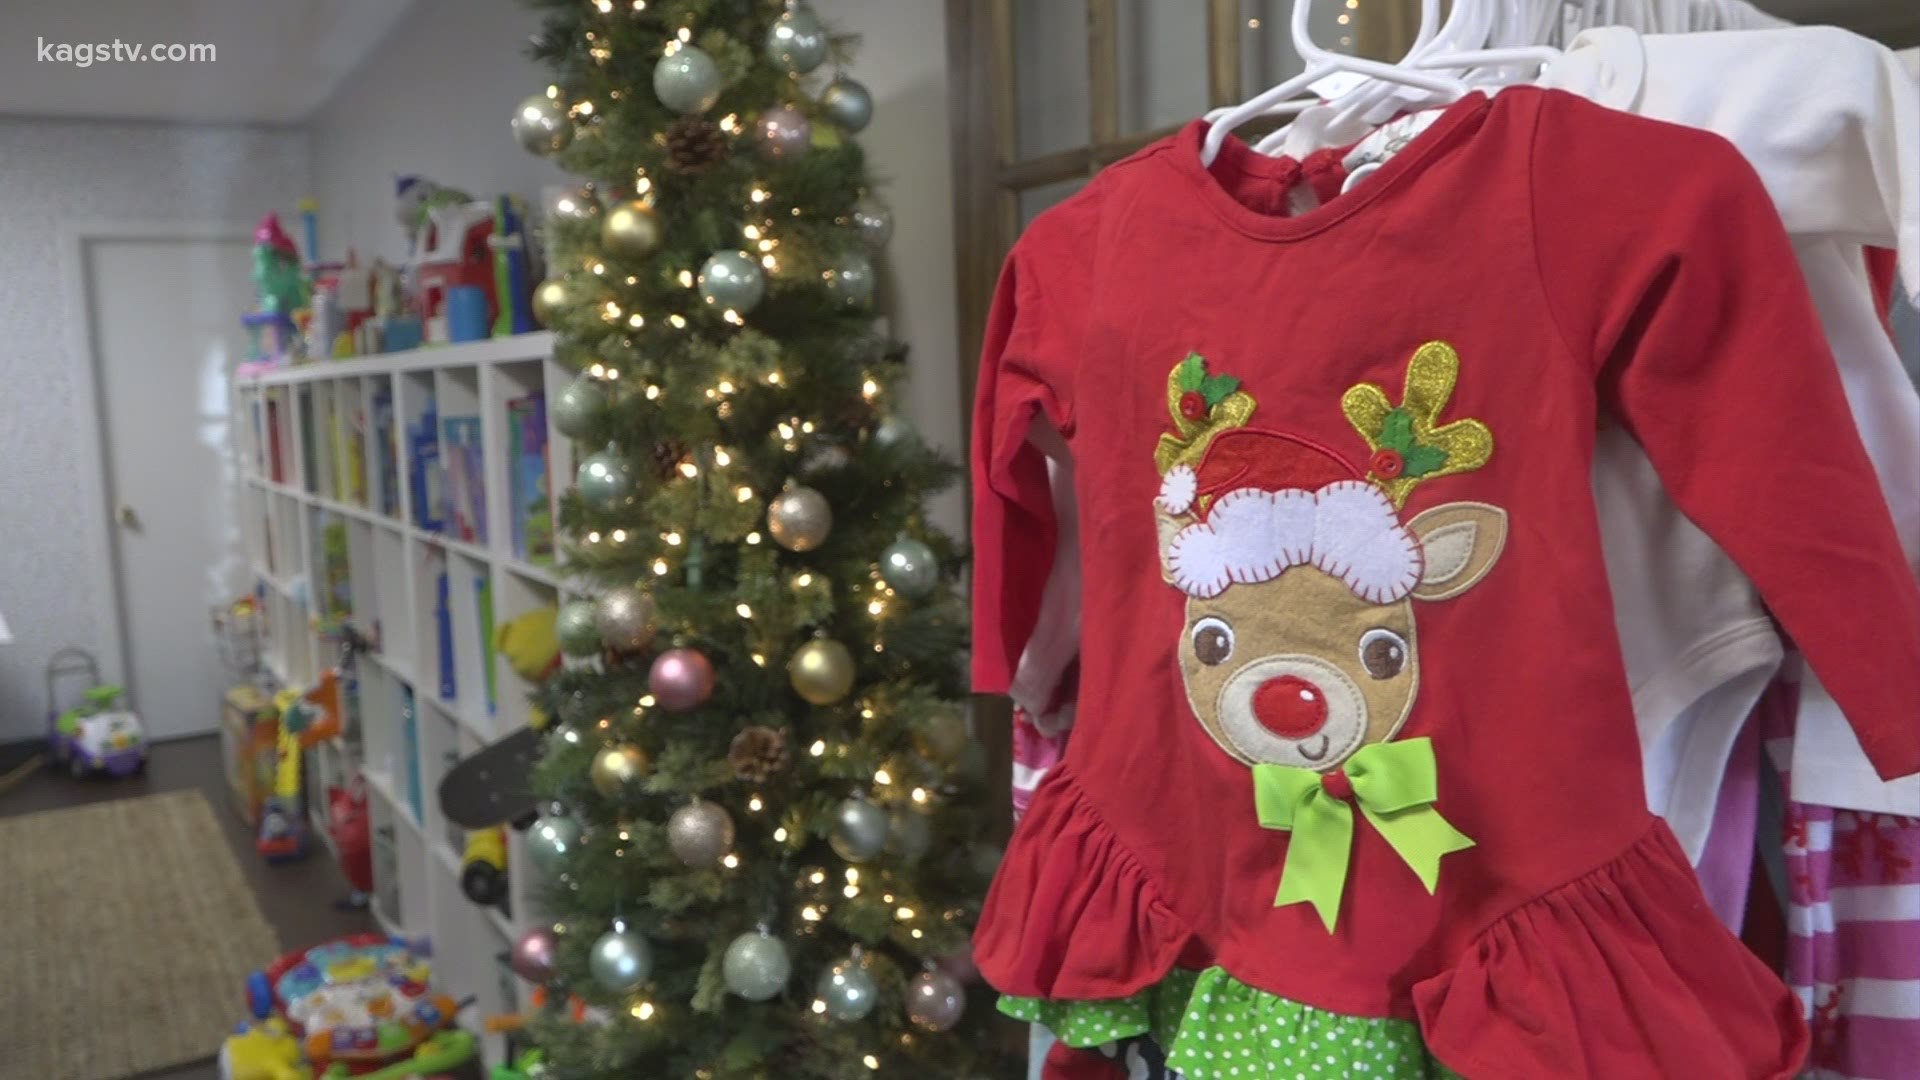 everal local organizations are making sure Brazos Valley foster children don't go without any gifts this year, but need the community's help.